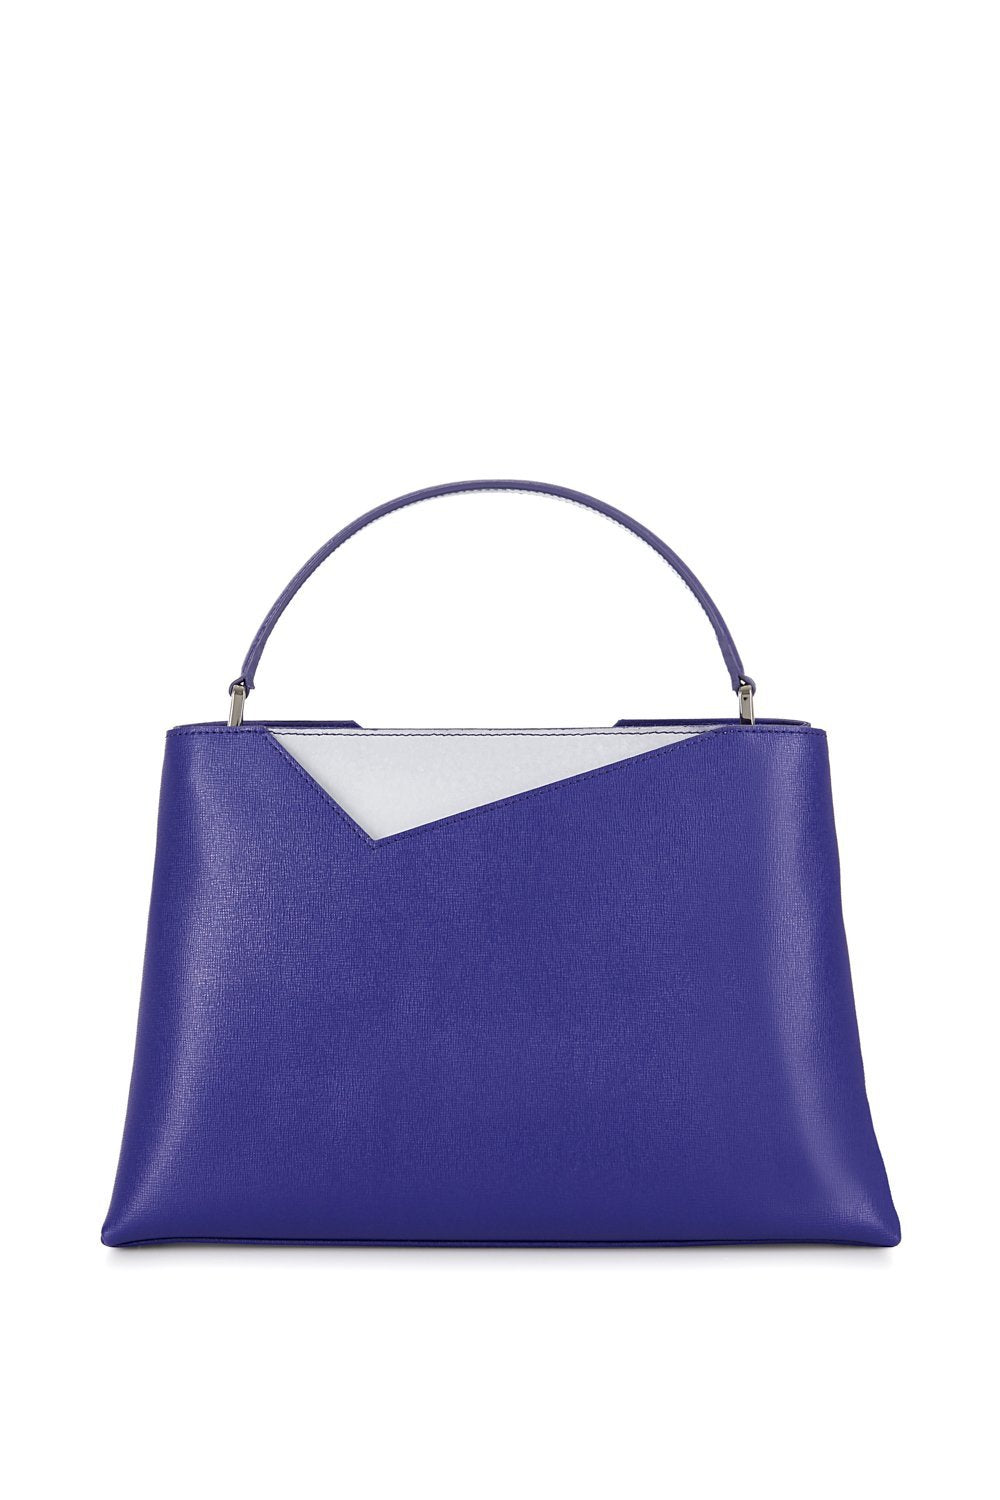 Midi Amy Tote | Violet Saffiano Leather – Stacy Chan Limited